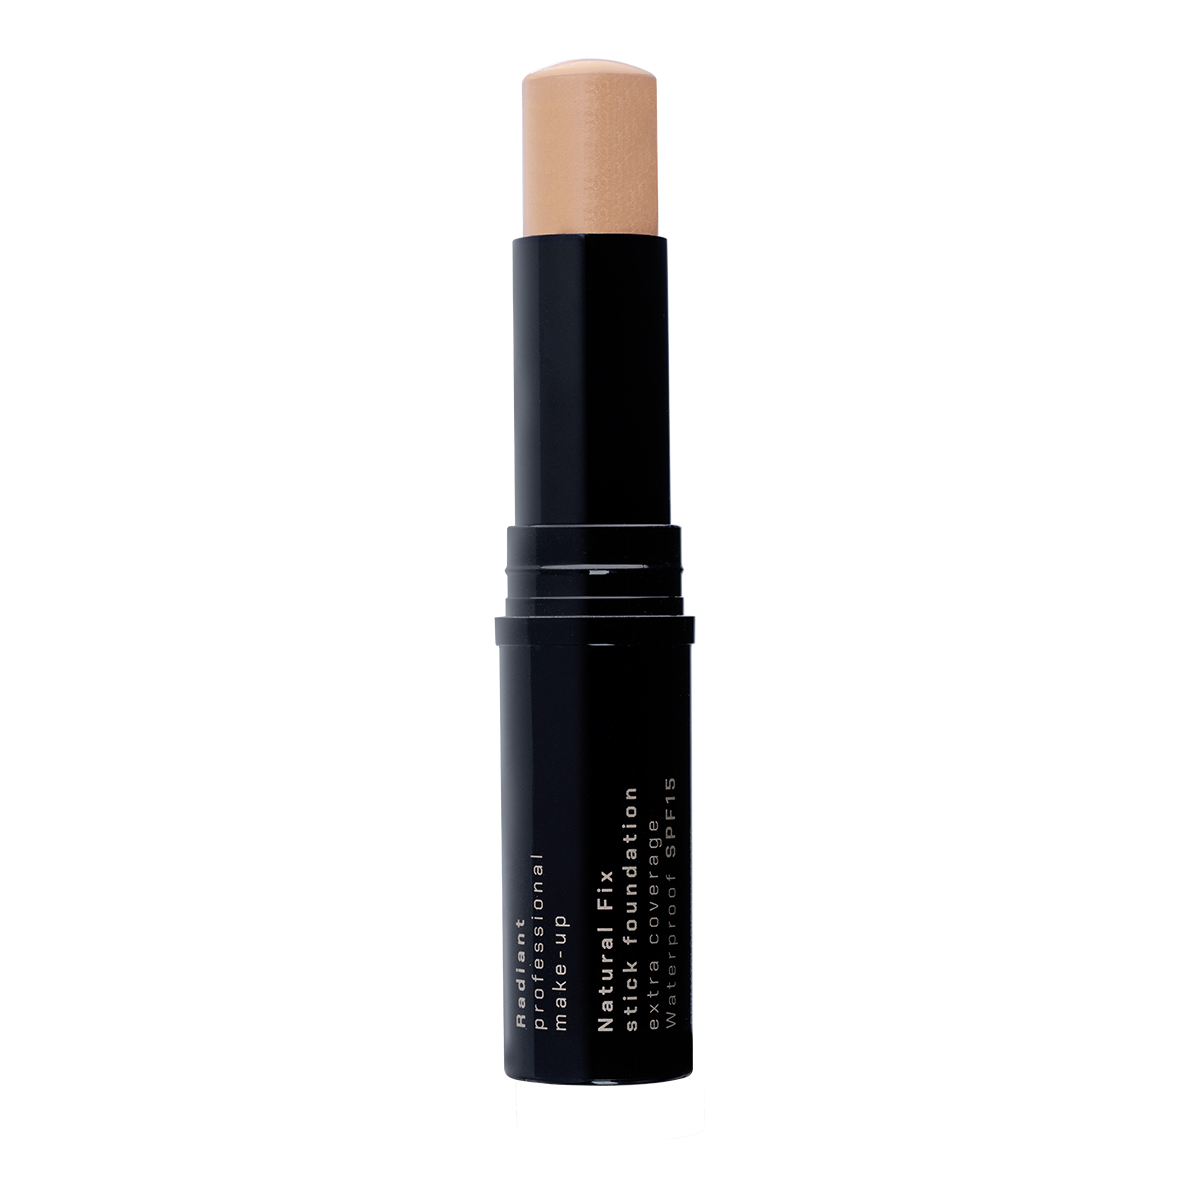 NATURAL FIX EXTRA COVERAGE STICK FOUNDATION  WATERPROOF SPF 15 (01 LATTE)